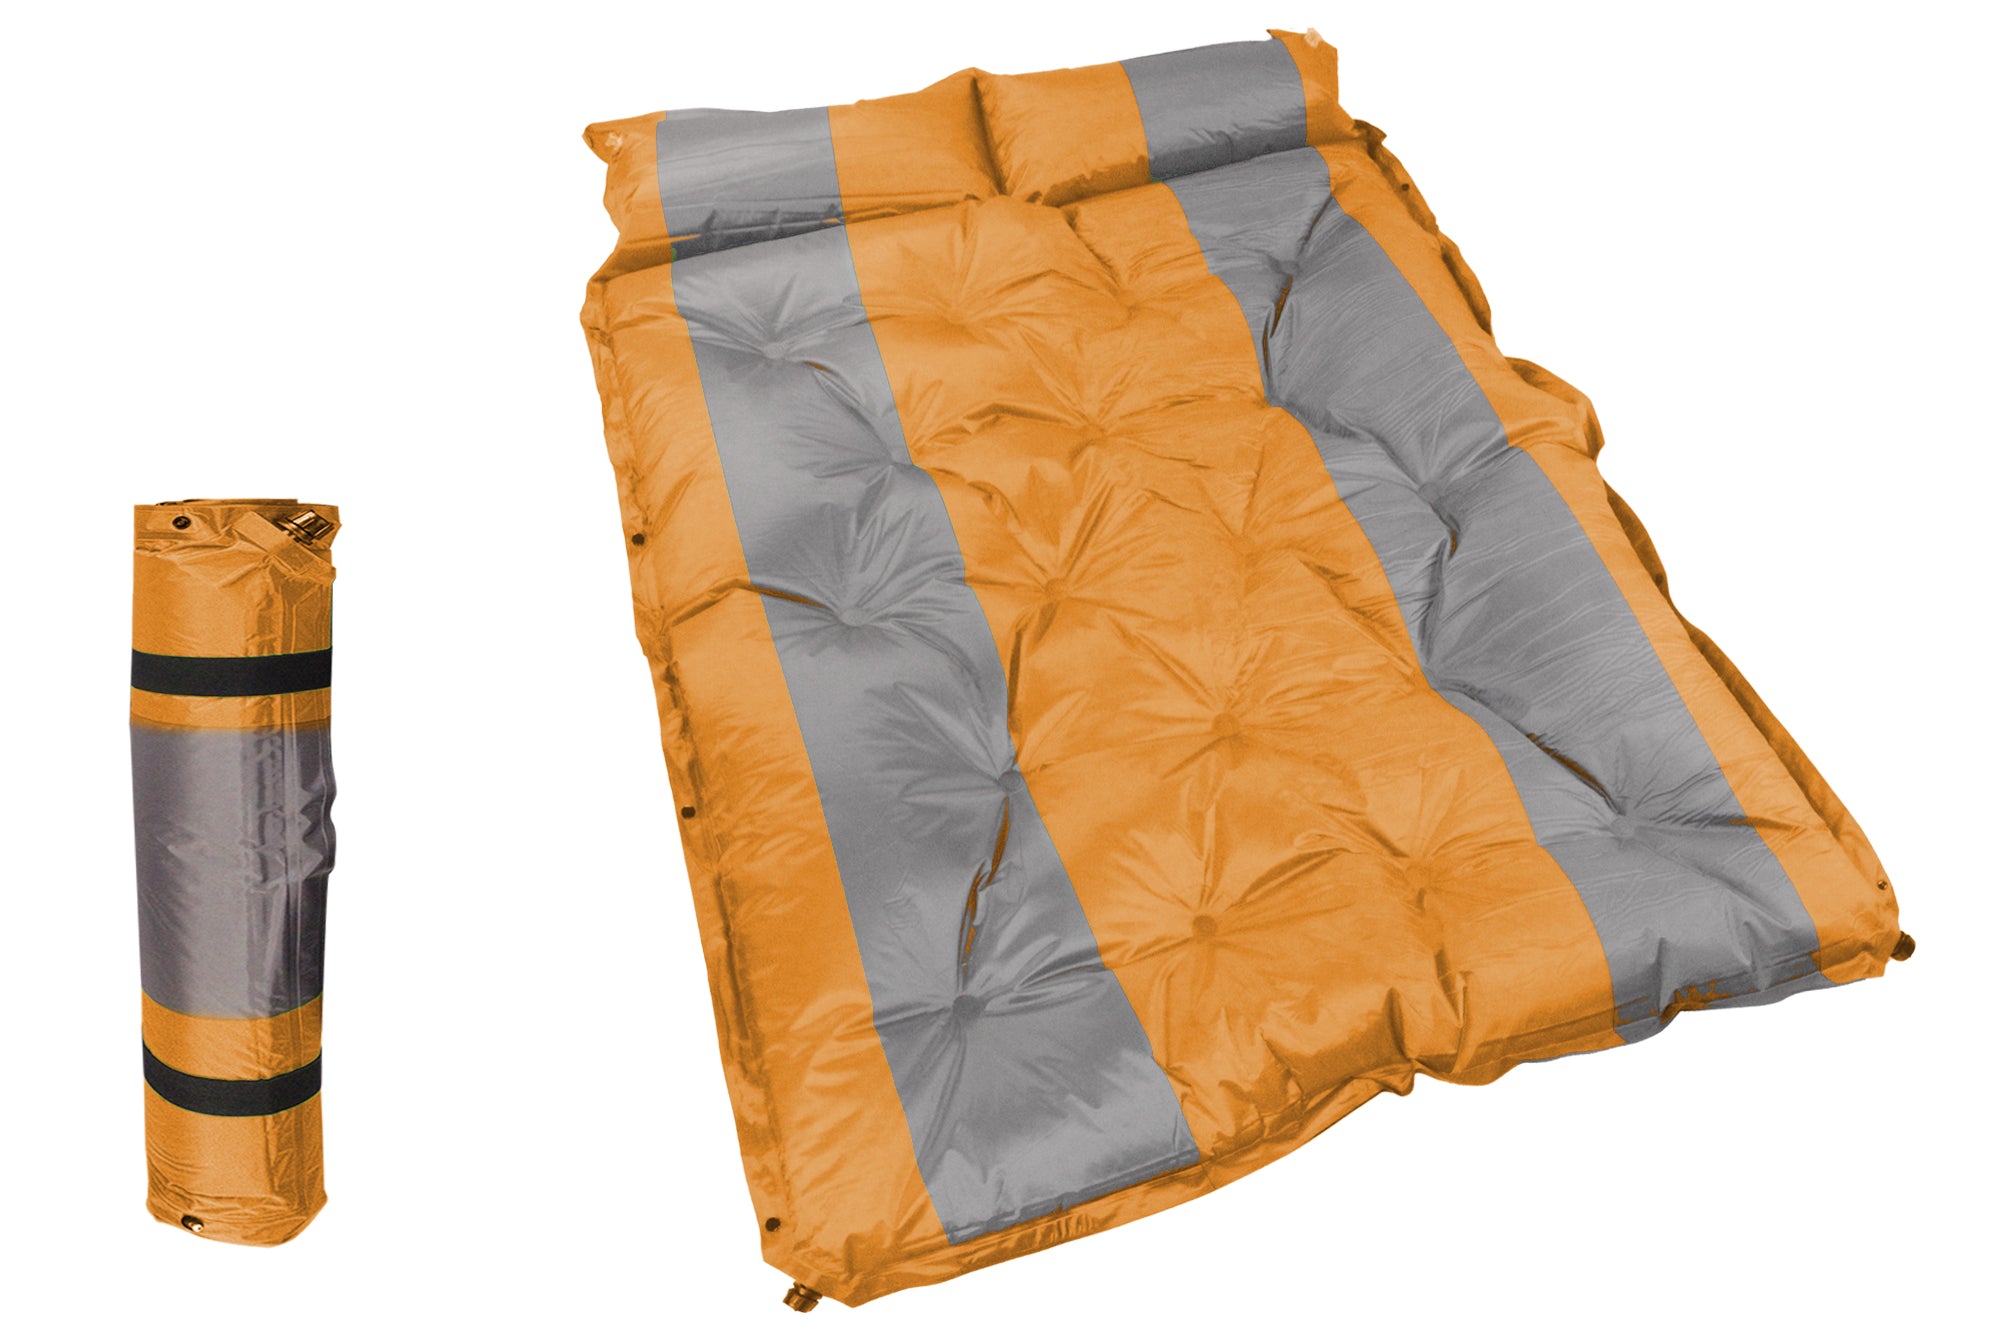 184x120cm Self-Inflating Double Camping Mattress with Inflatable Headrests